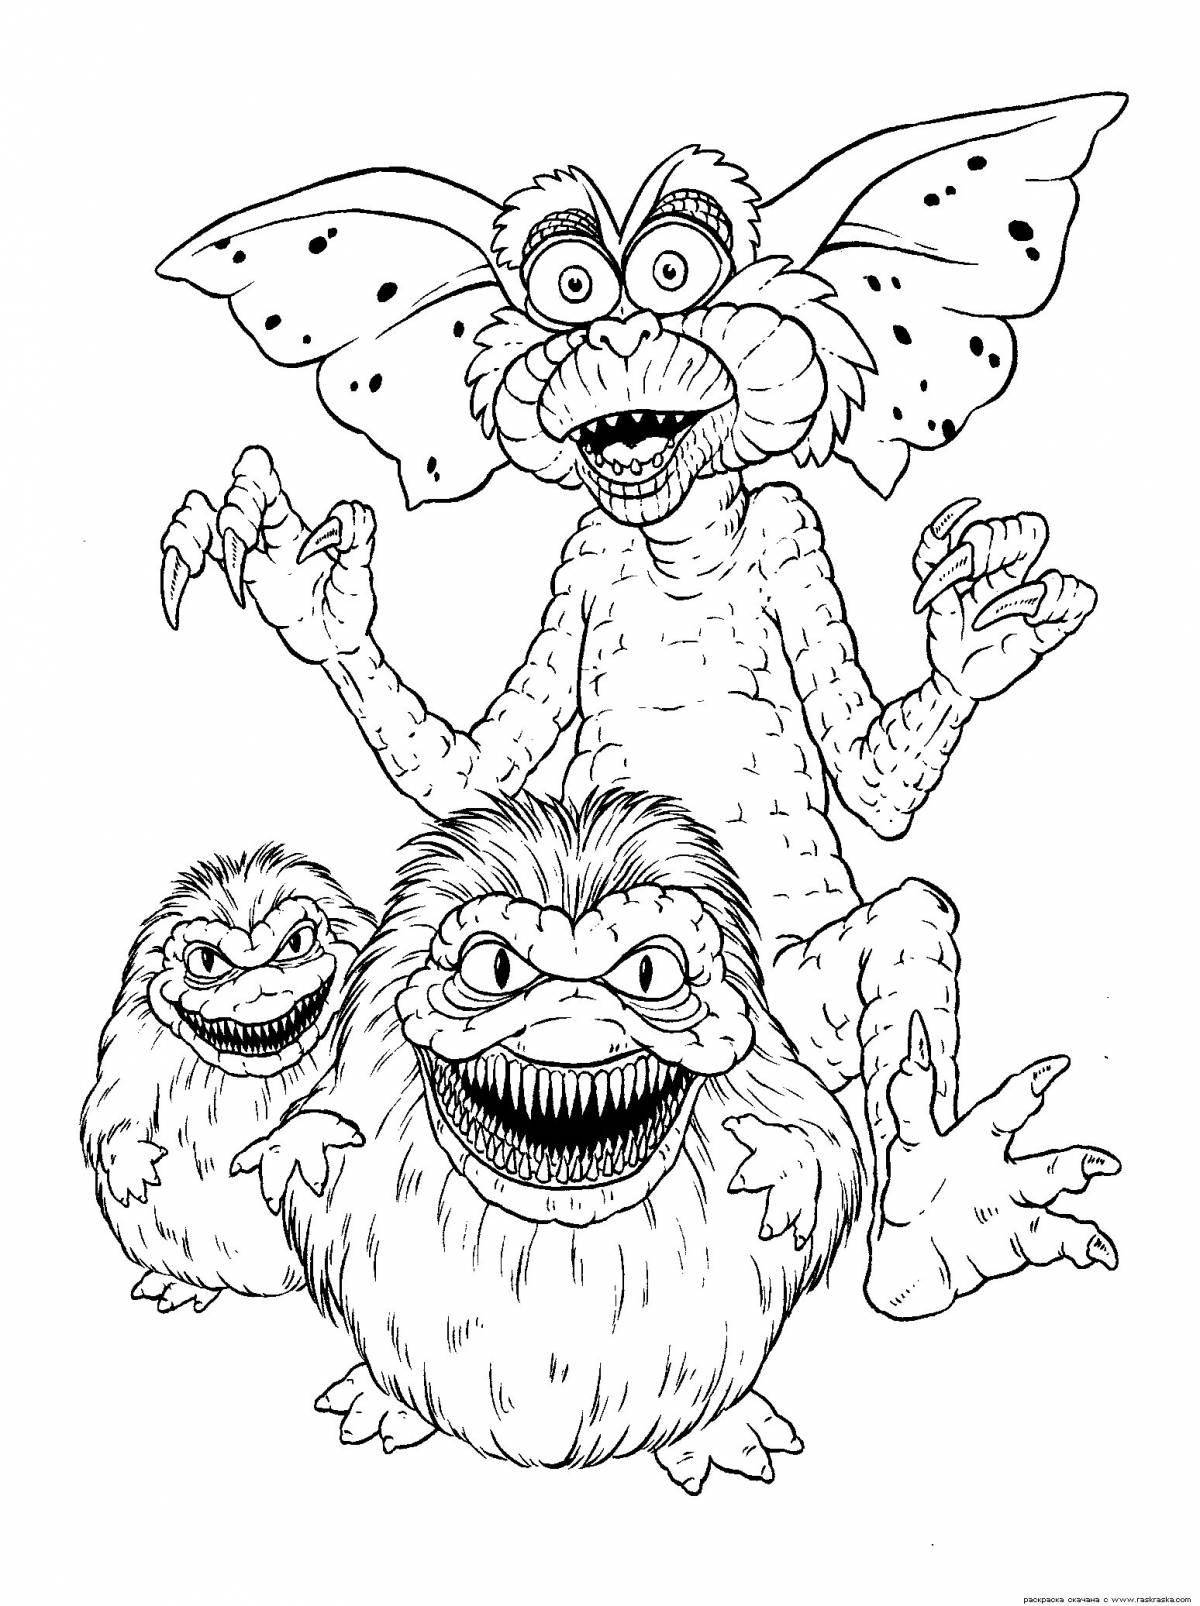 Fun coloring monsters for children 6-7 years old